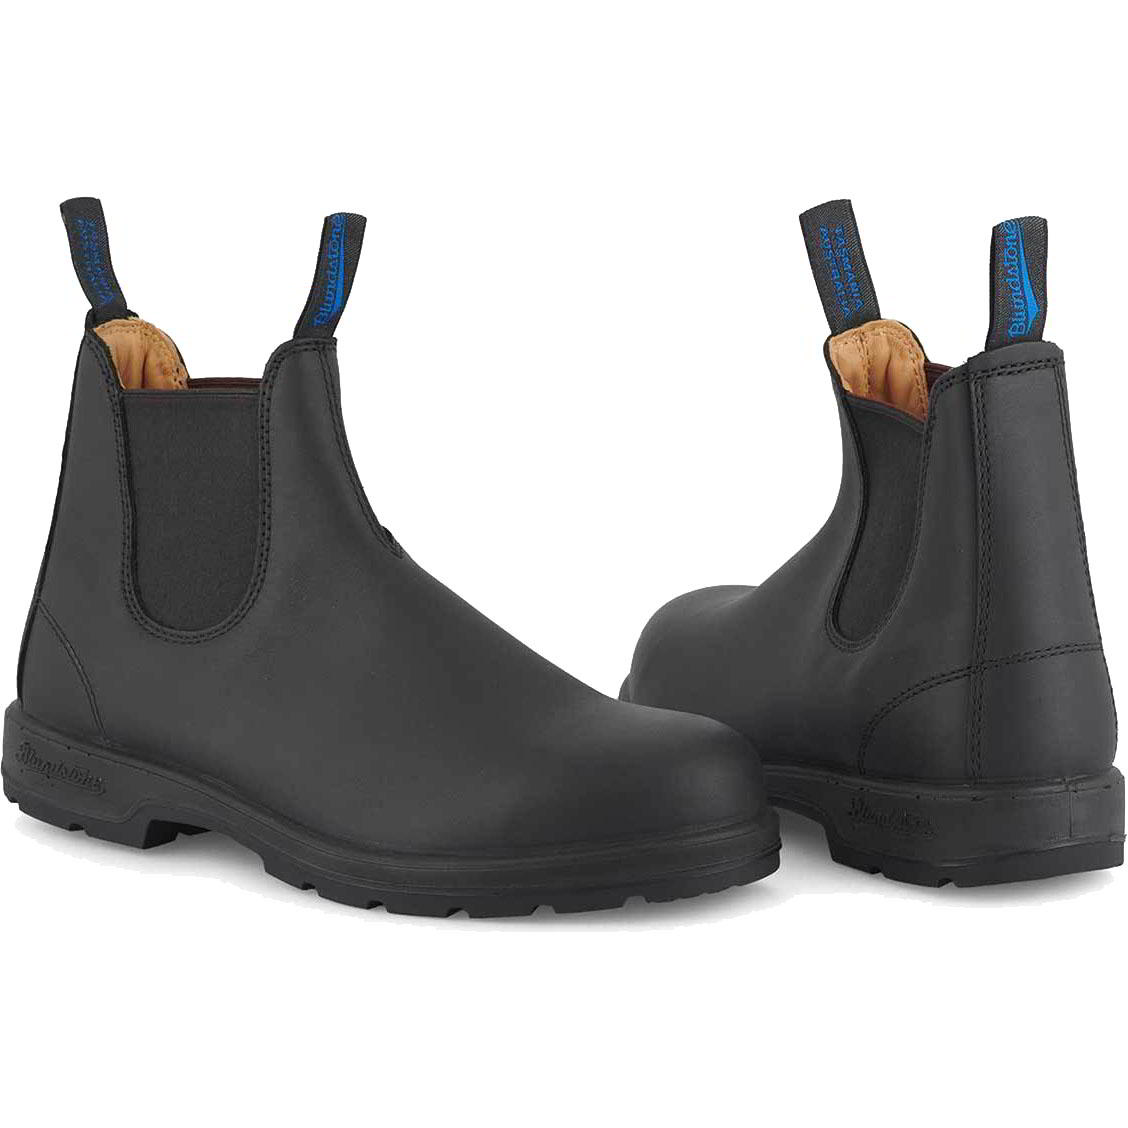 Blundstone Mens 566 Warm Lined Thermal Chelsea Boots - UK 8 Black